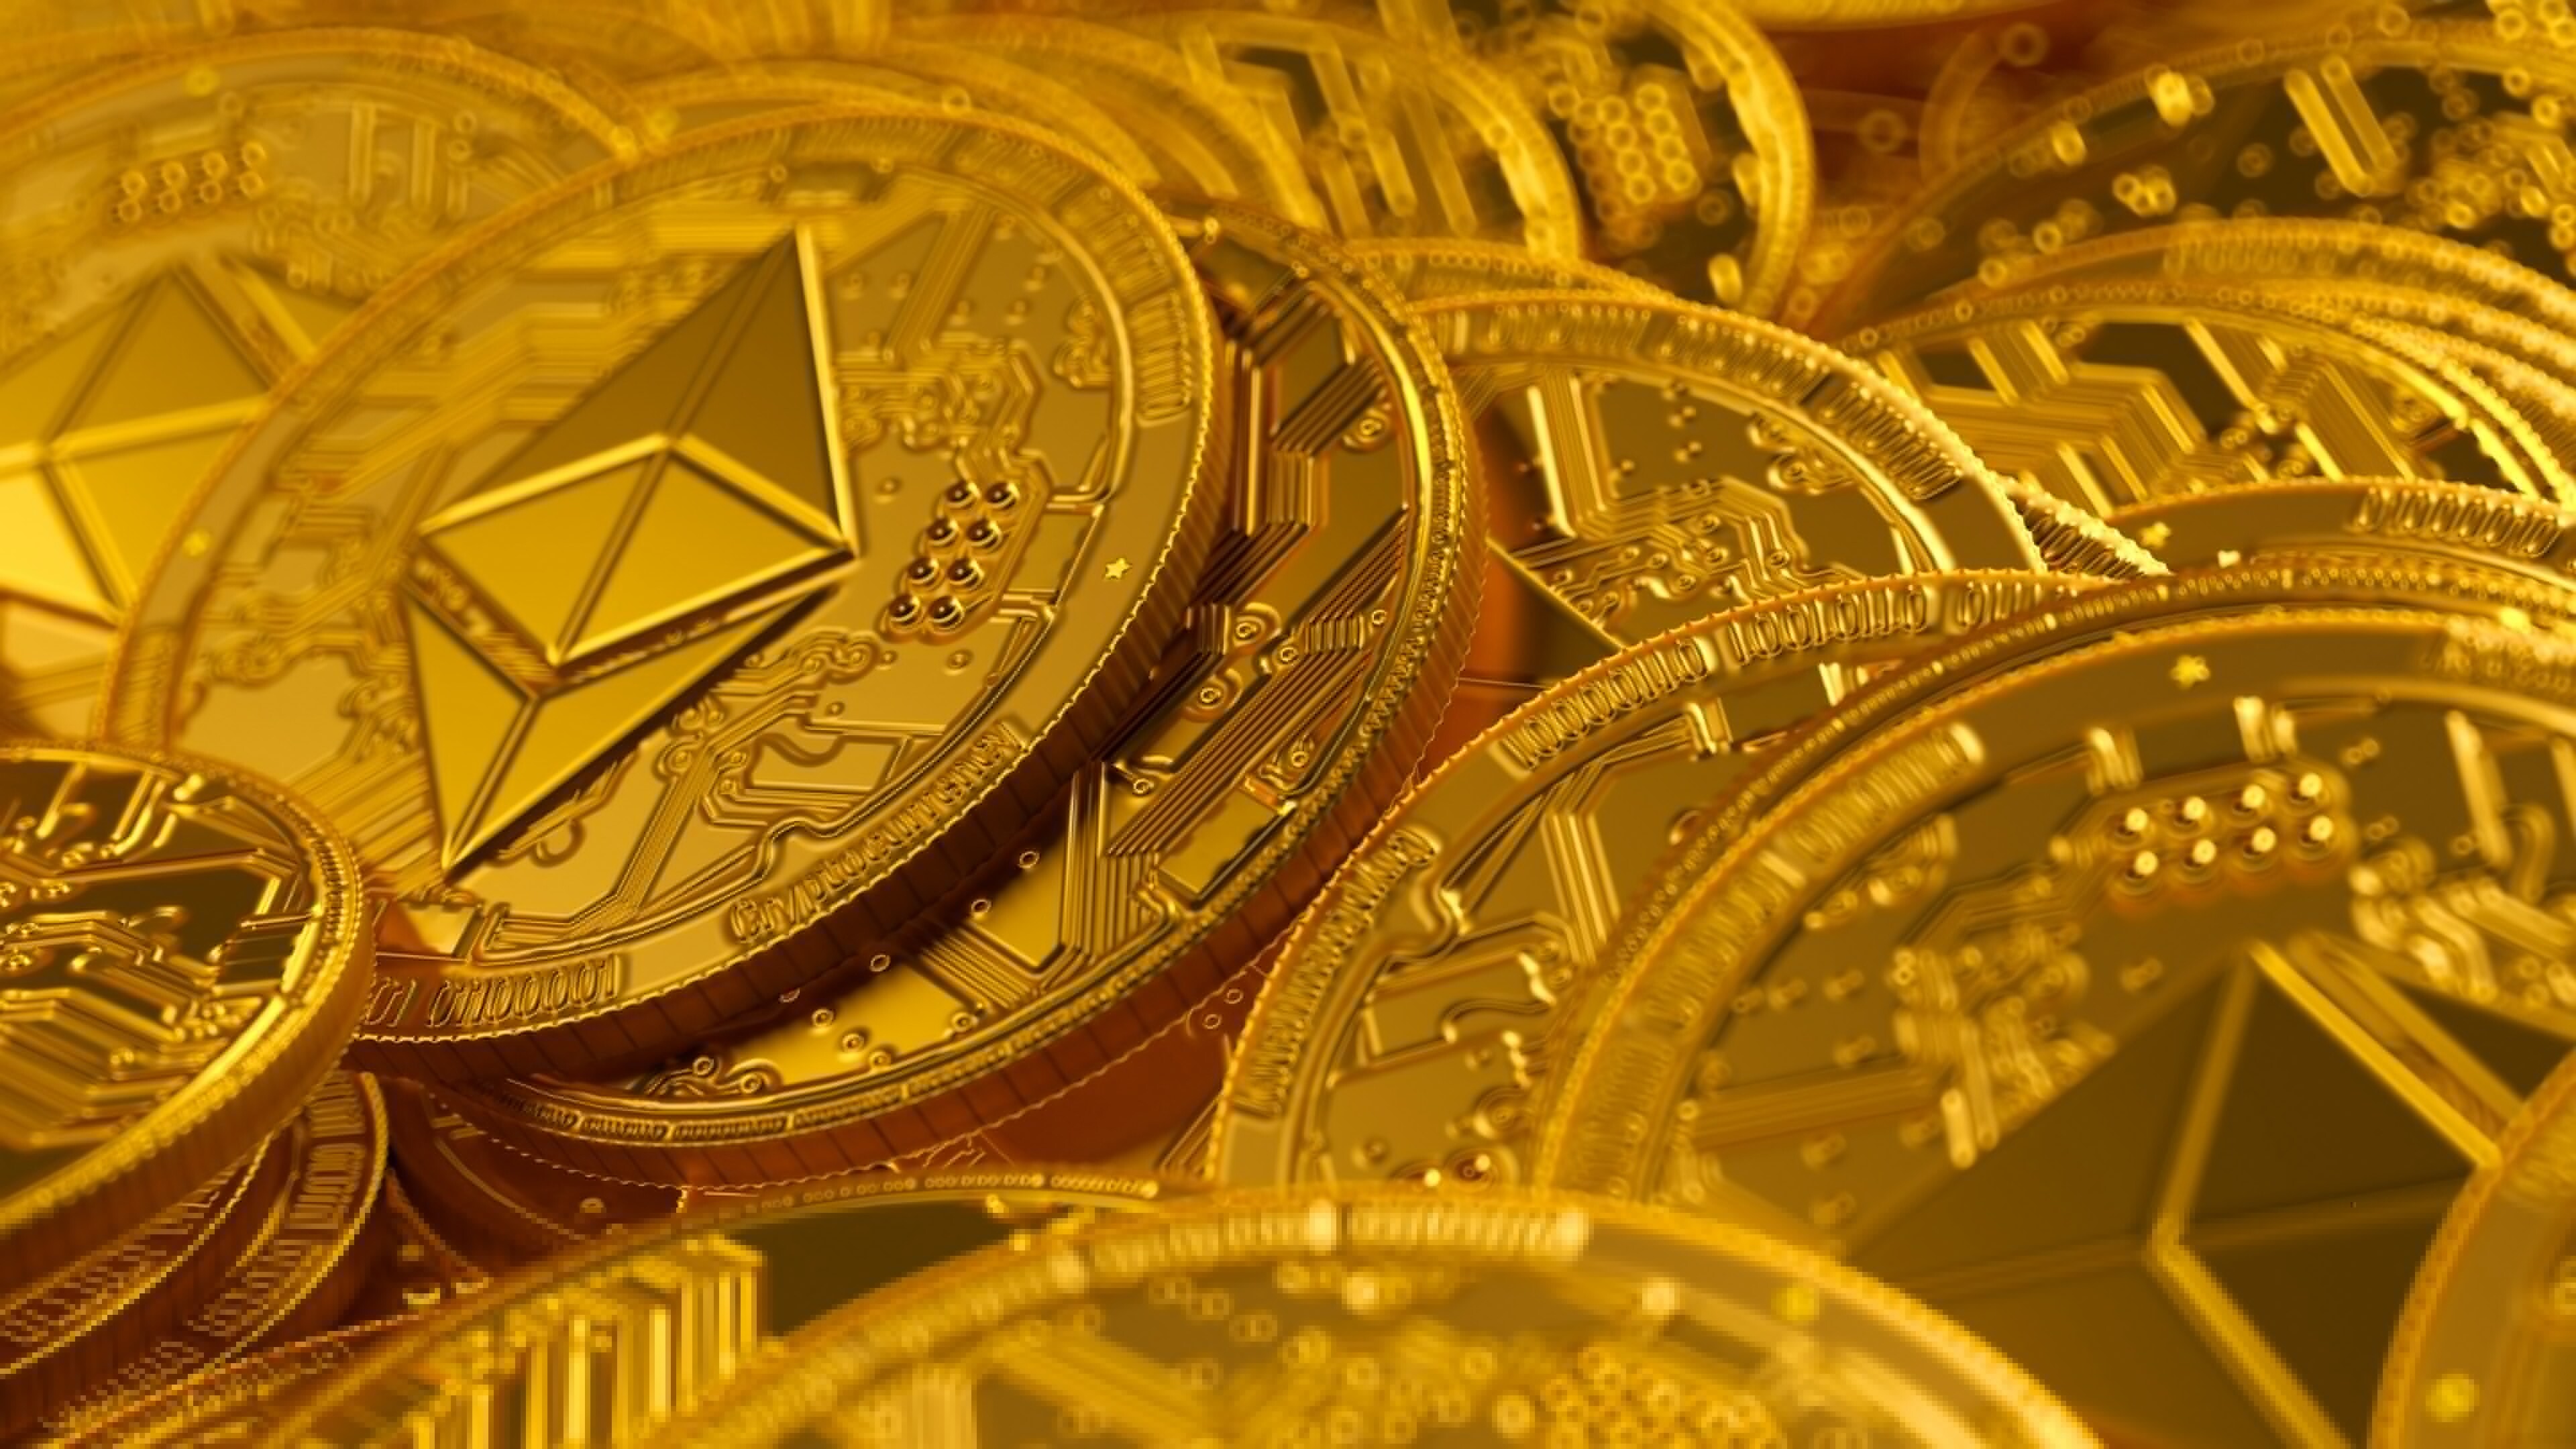 Cryptocurrency: Ethereum, A decentralized blockchain network powered by the Ether token. 3840x2160 4K Wallpaper.